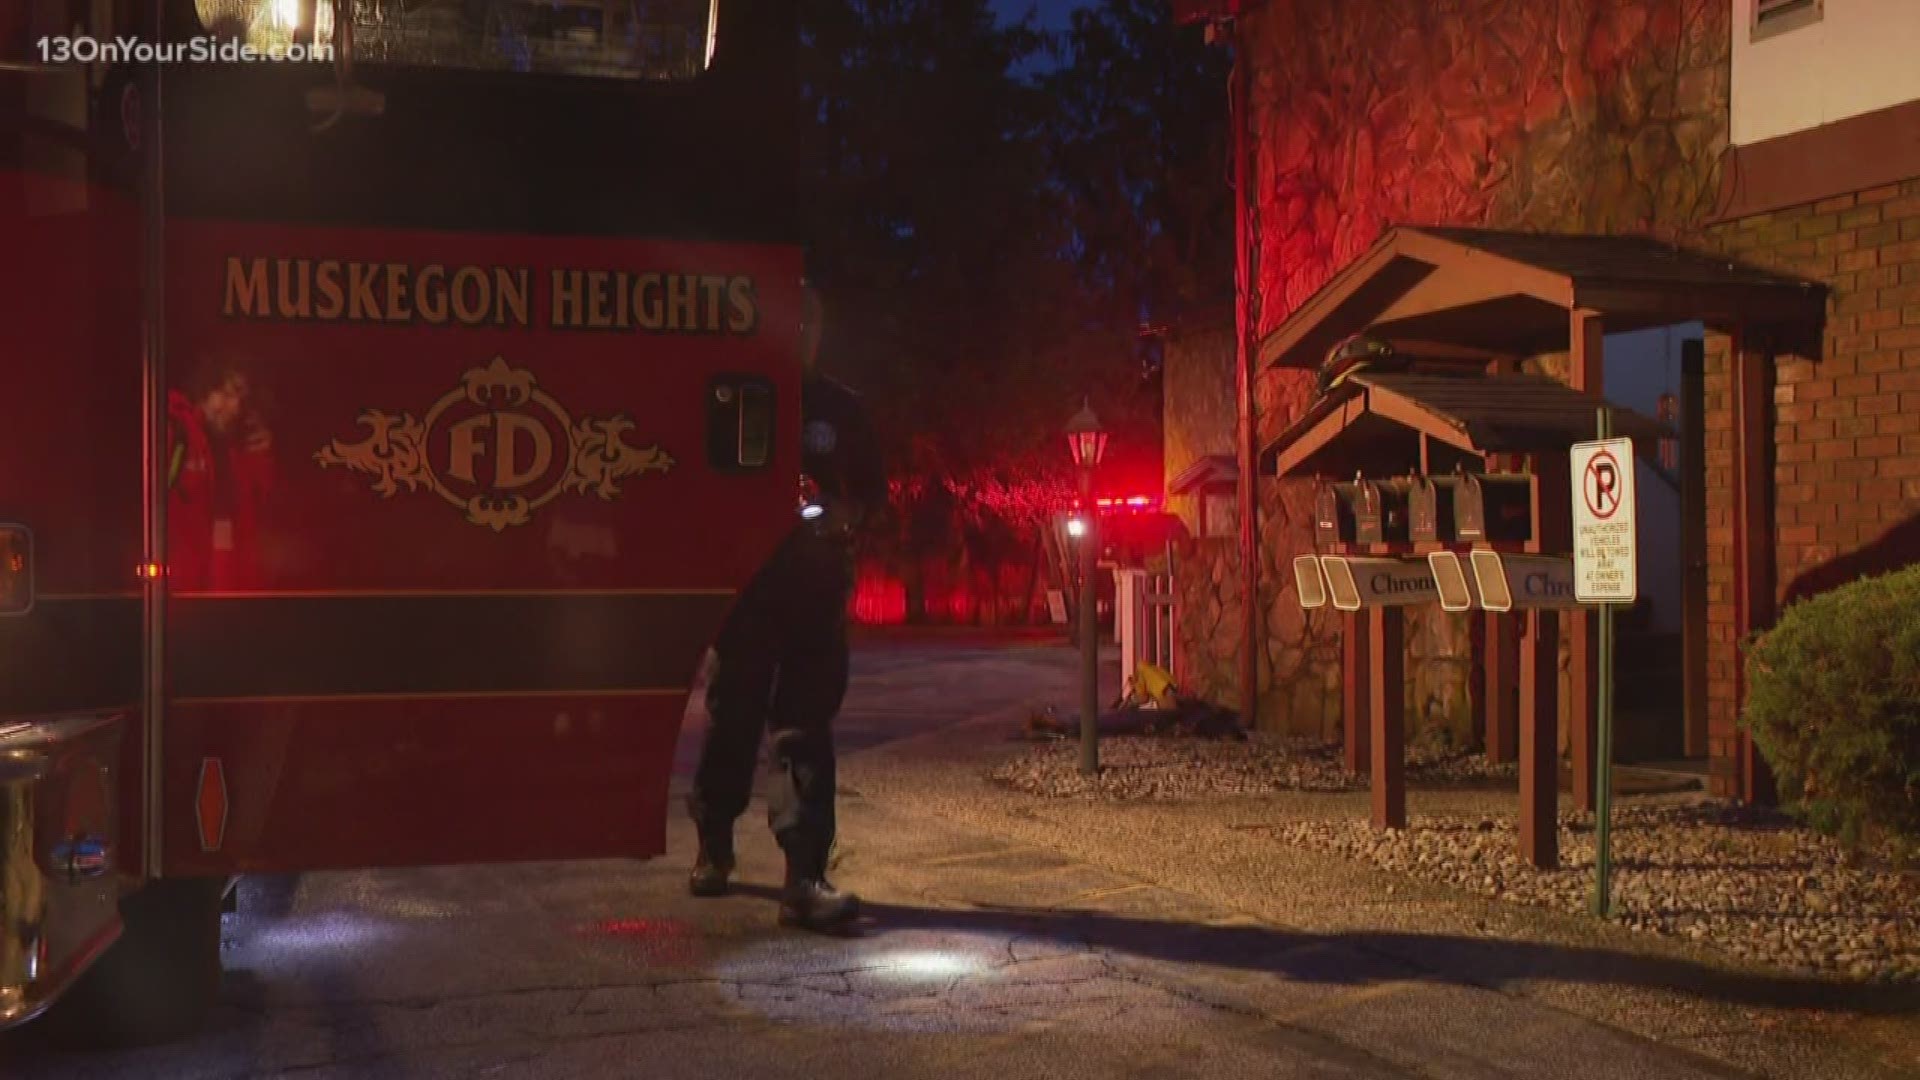 A fire has left residents of a Muskegon Heights apartment building temporarily displaced Thursday morning. According to authorities, the fire broke out in the storage closet. It was put out quickly, but officers did need to evacuate all the tenants of the building.